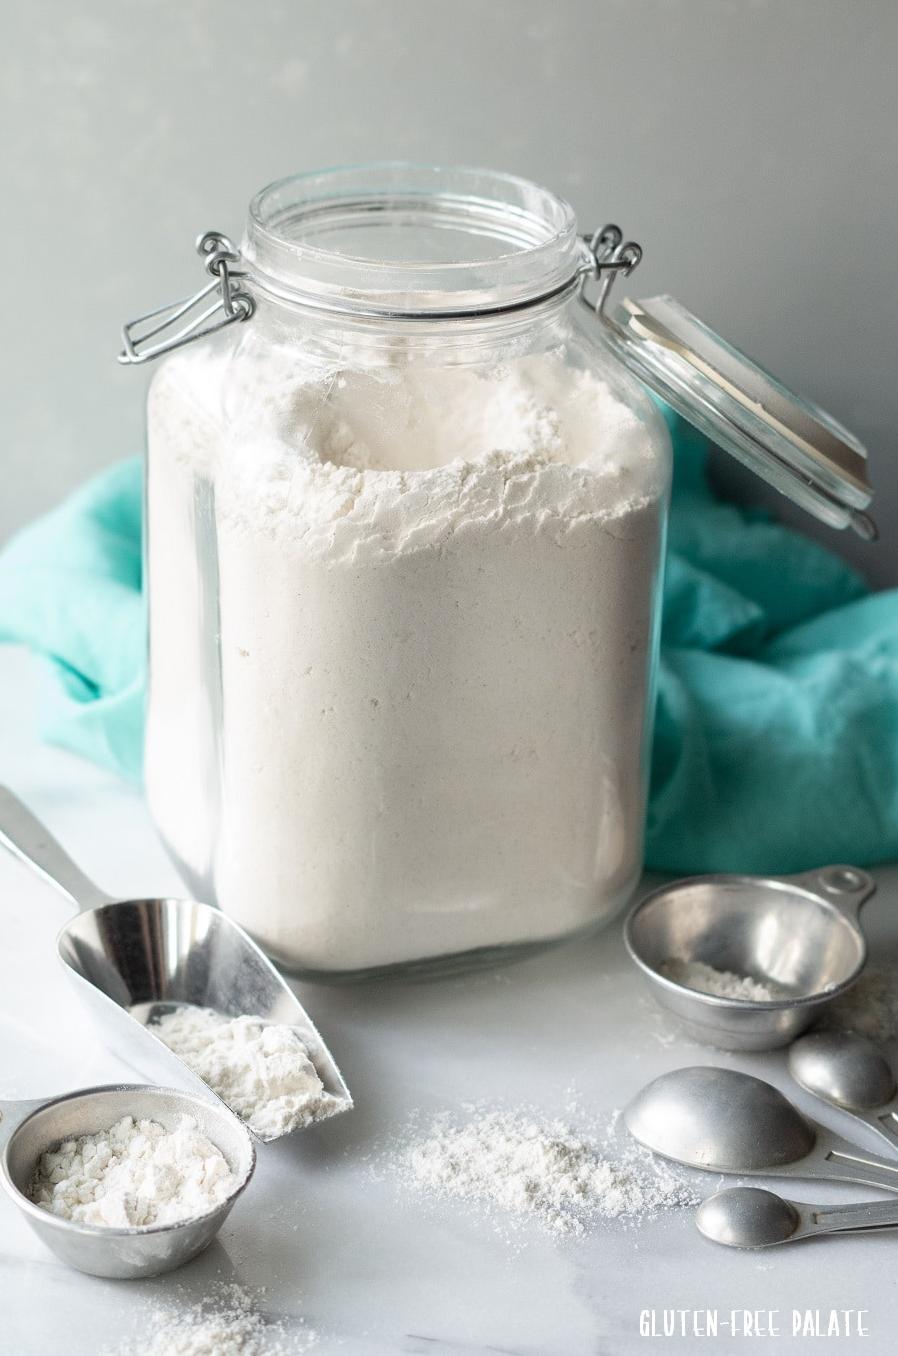  Whip up some delicious gluten-free treats with this amazing flour!